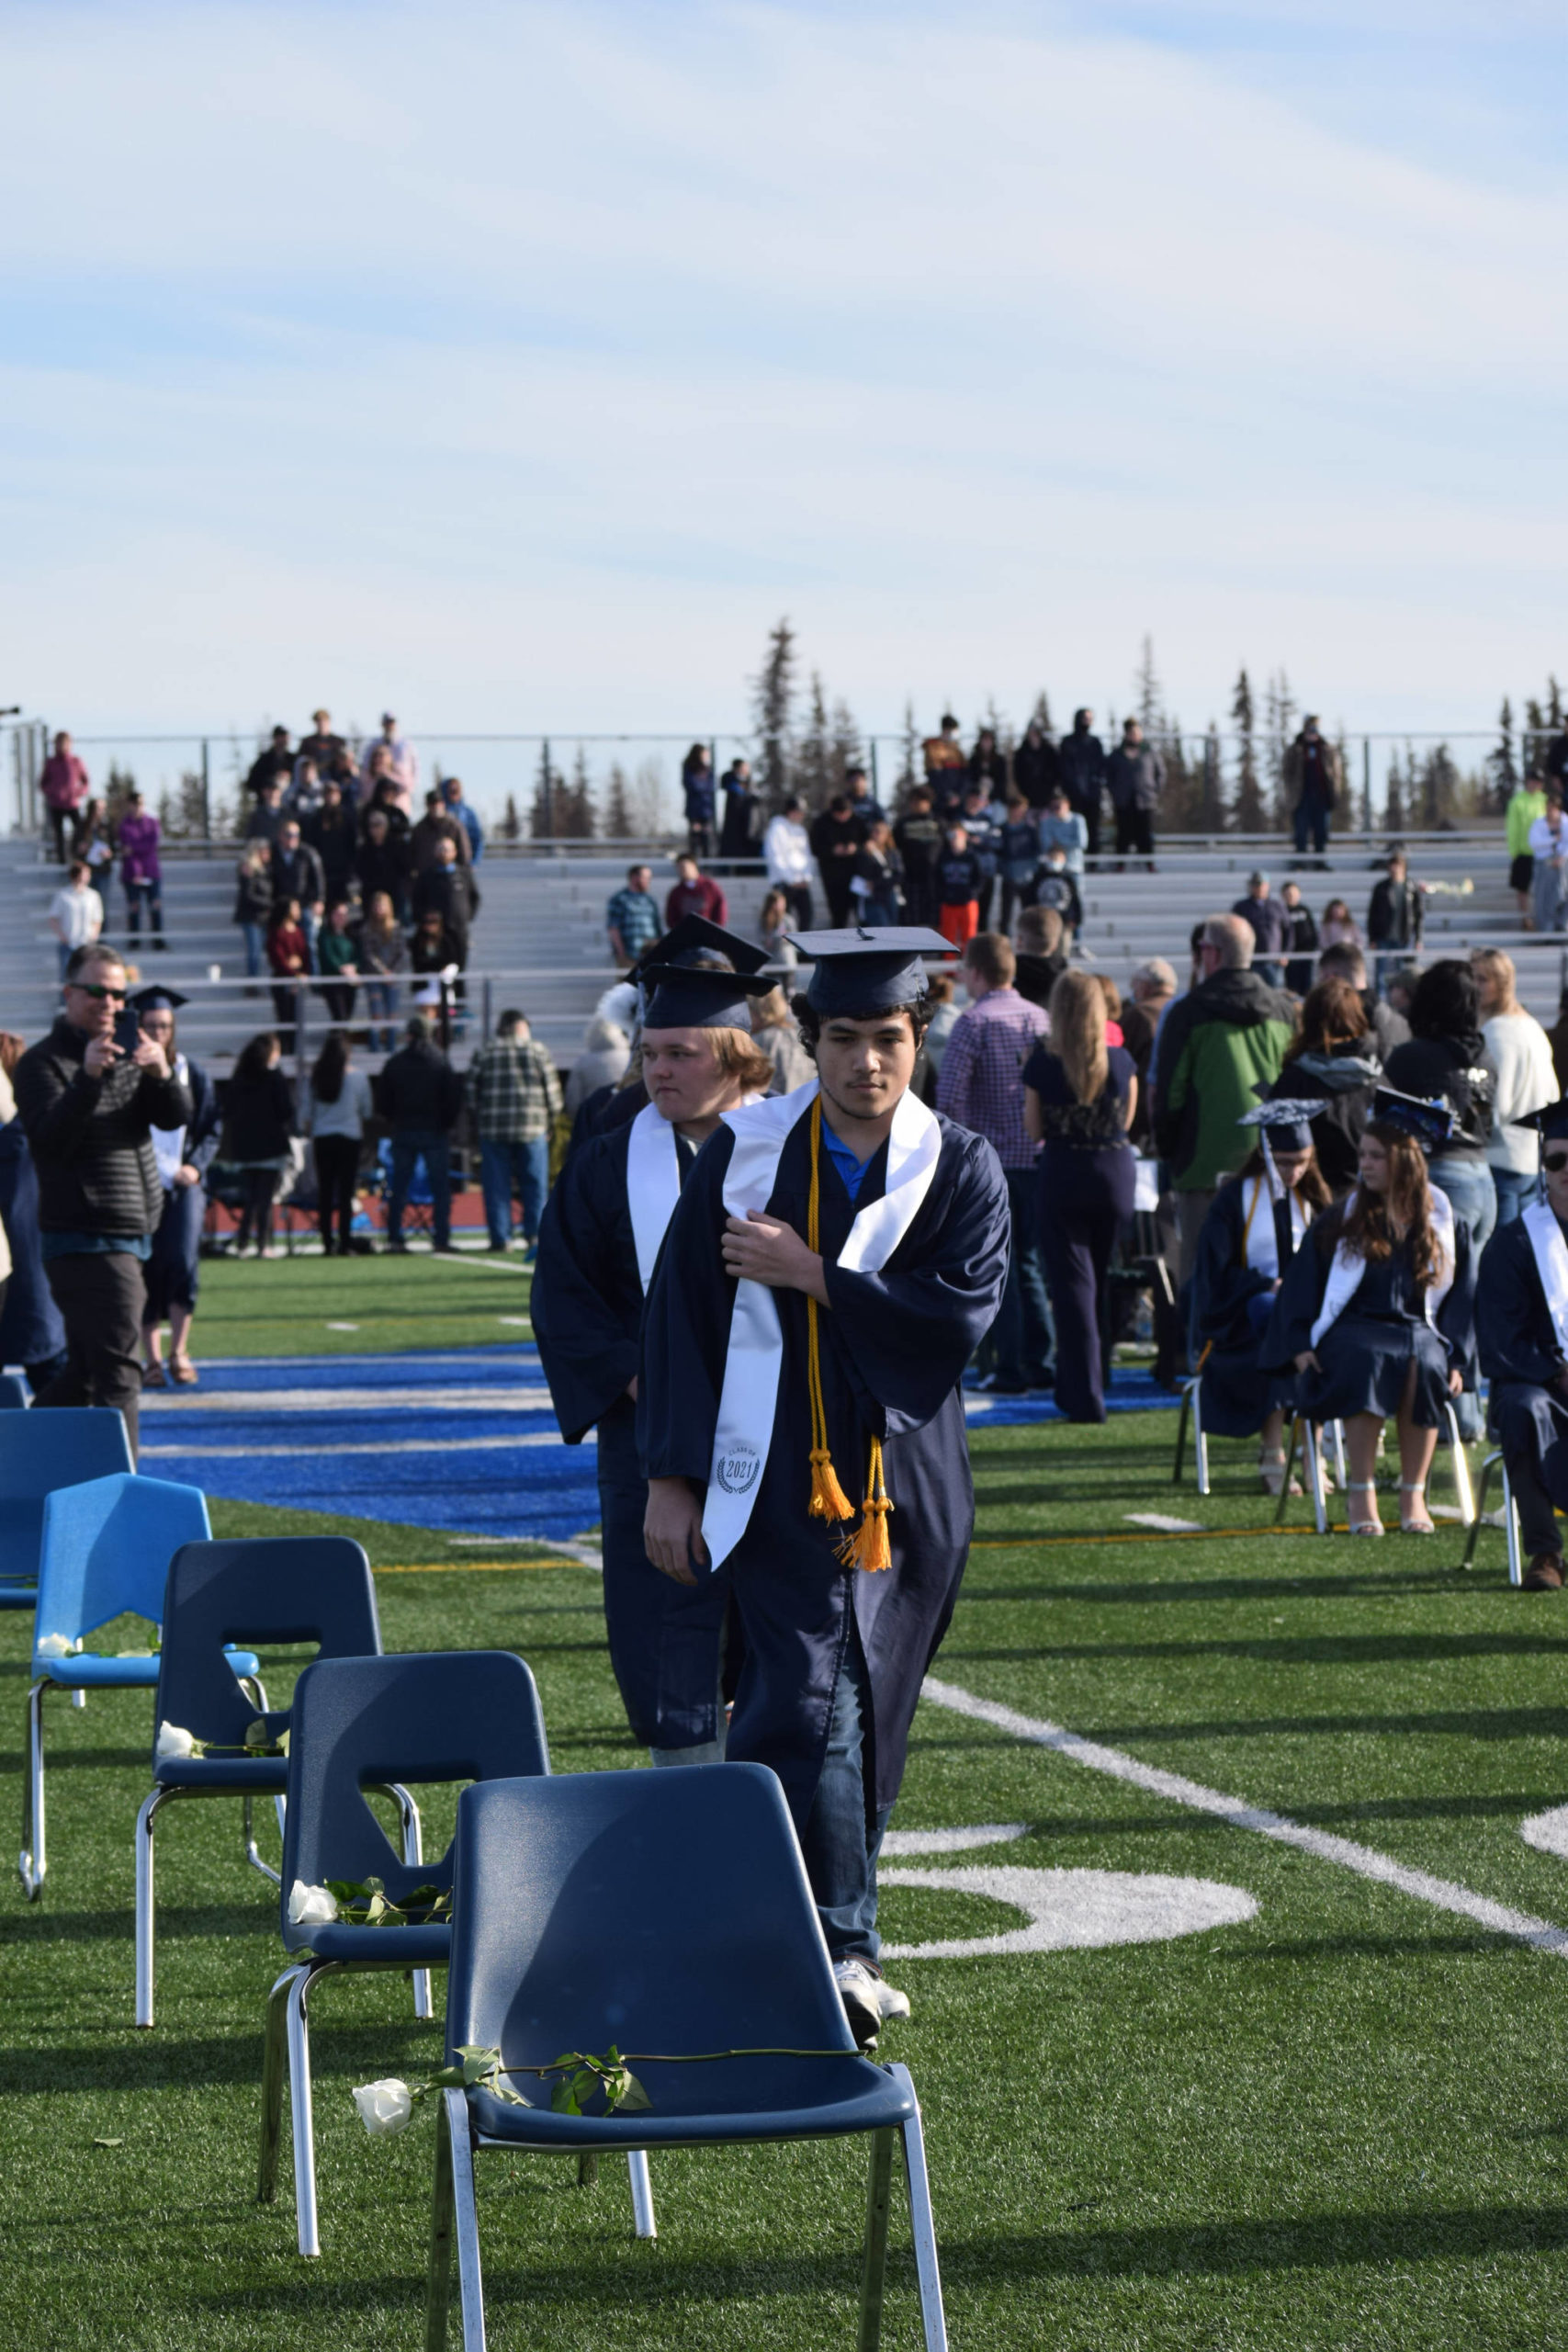 Soldotna High School students celebrate their graduation on Tuesday, May 18, 2021 at the high school football field. (Camille Botello / Peninsula Clarion)